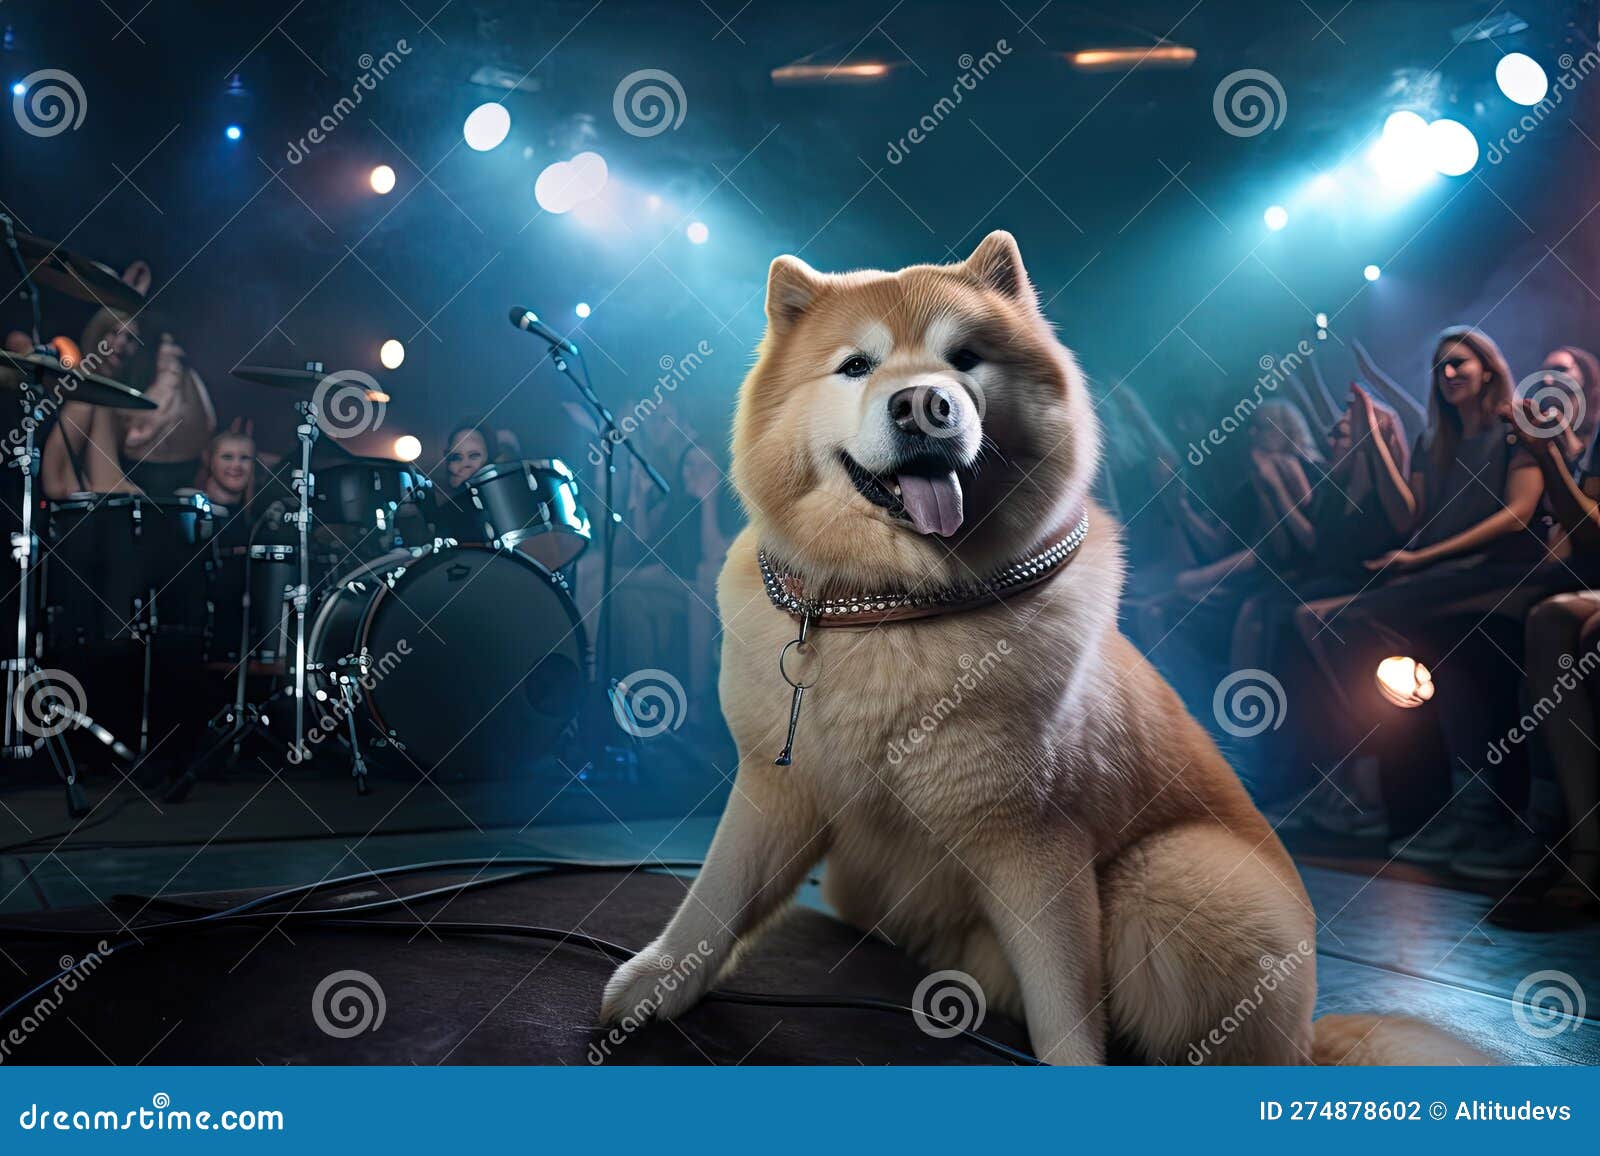 photoshopped image of dog sitting on stage in front of crowd, performing with band